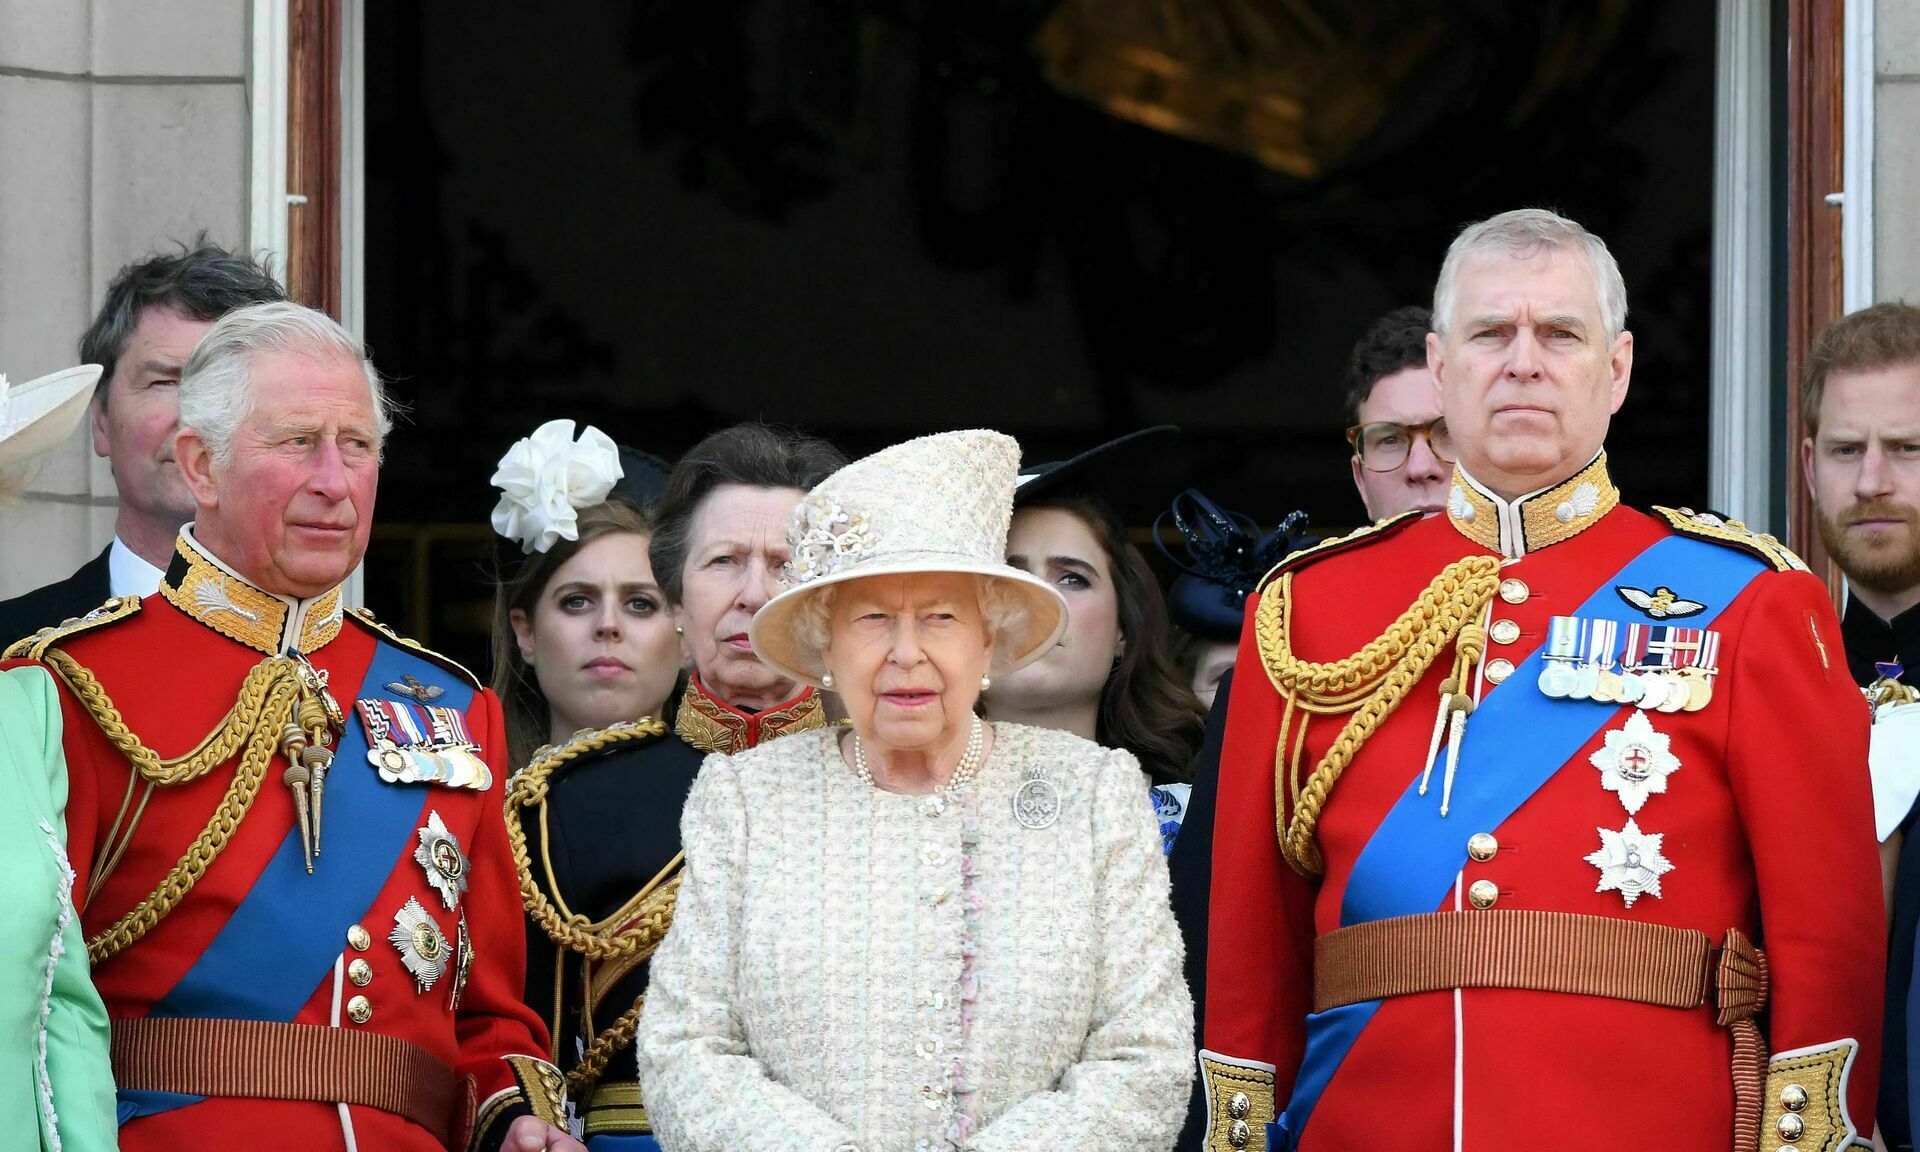 Prince Andrew - son of Elizabeth II - accused of raping minors